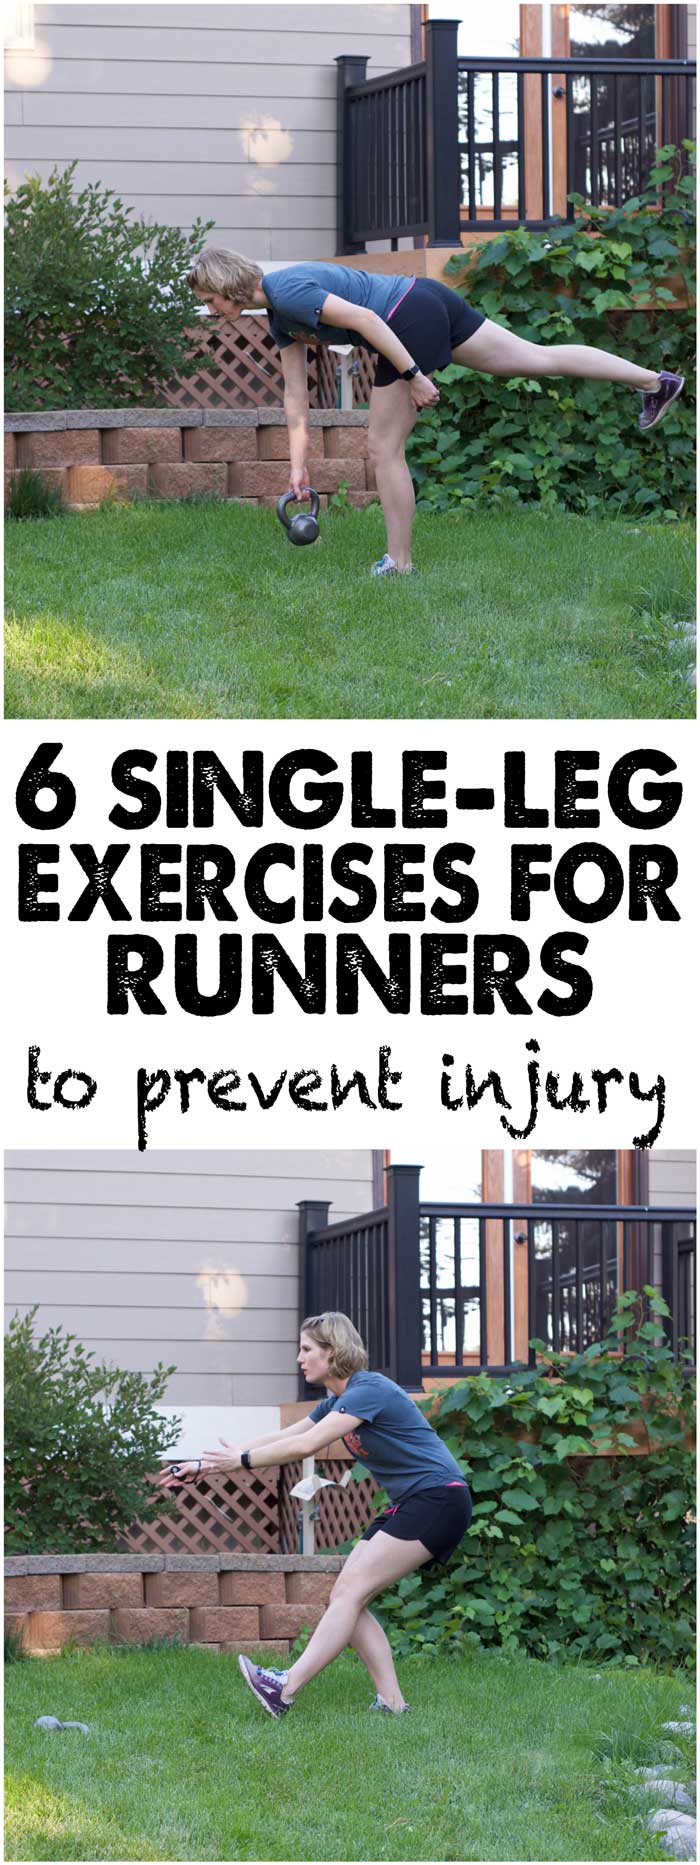 If you're a runner, you are probably no stranger to injury, but there are ways to prevent common overuse injuries with these 6 single-leg exercises for runners. - @TheFitCookie #fitness #running